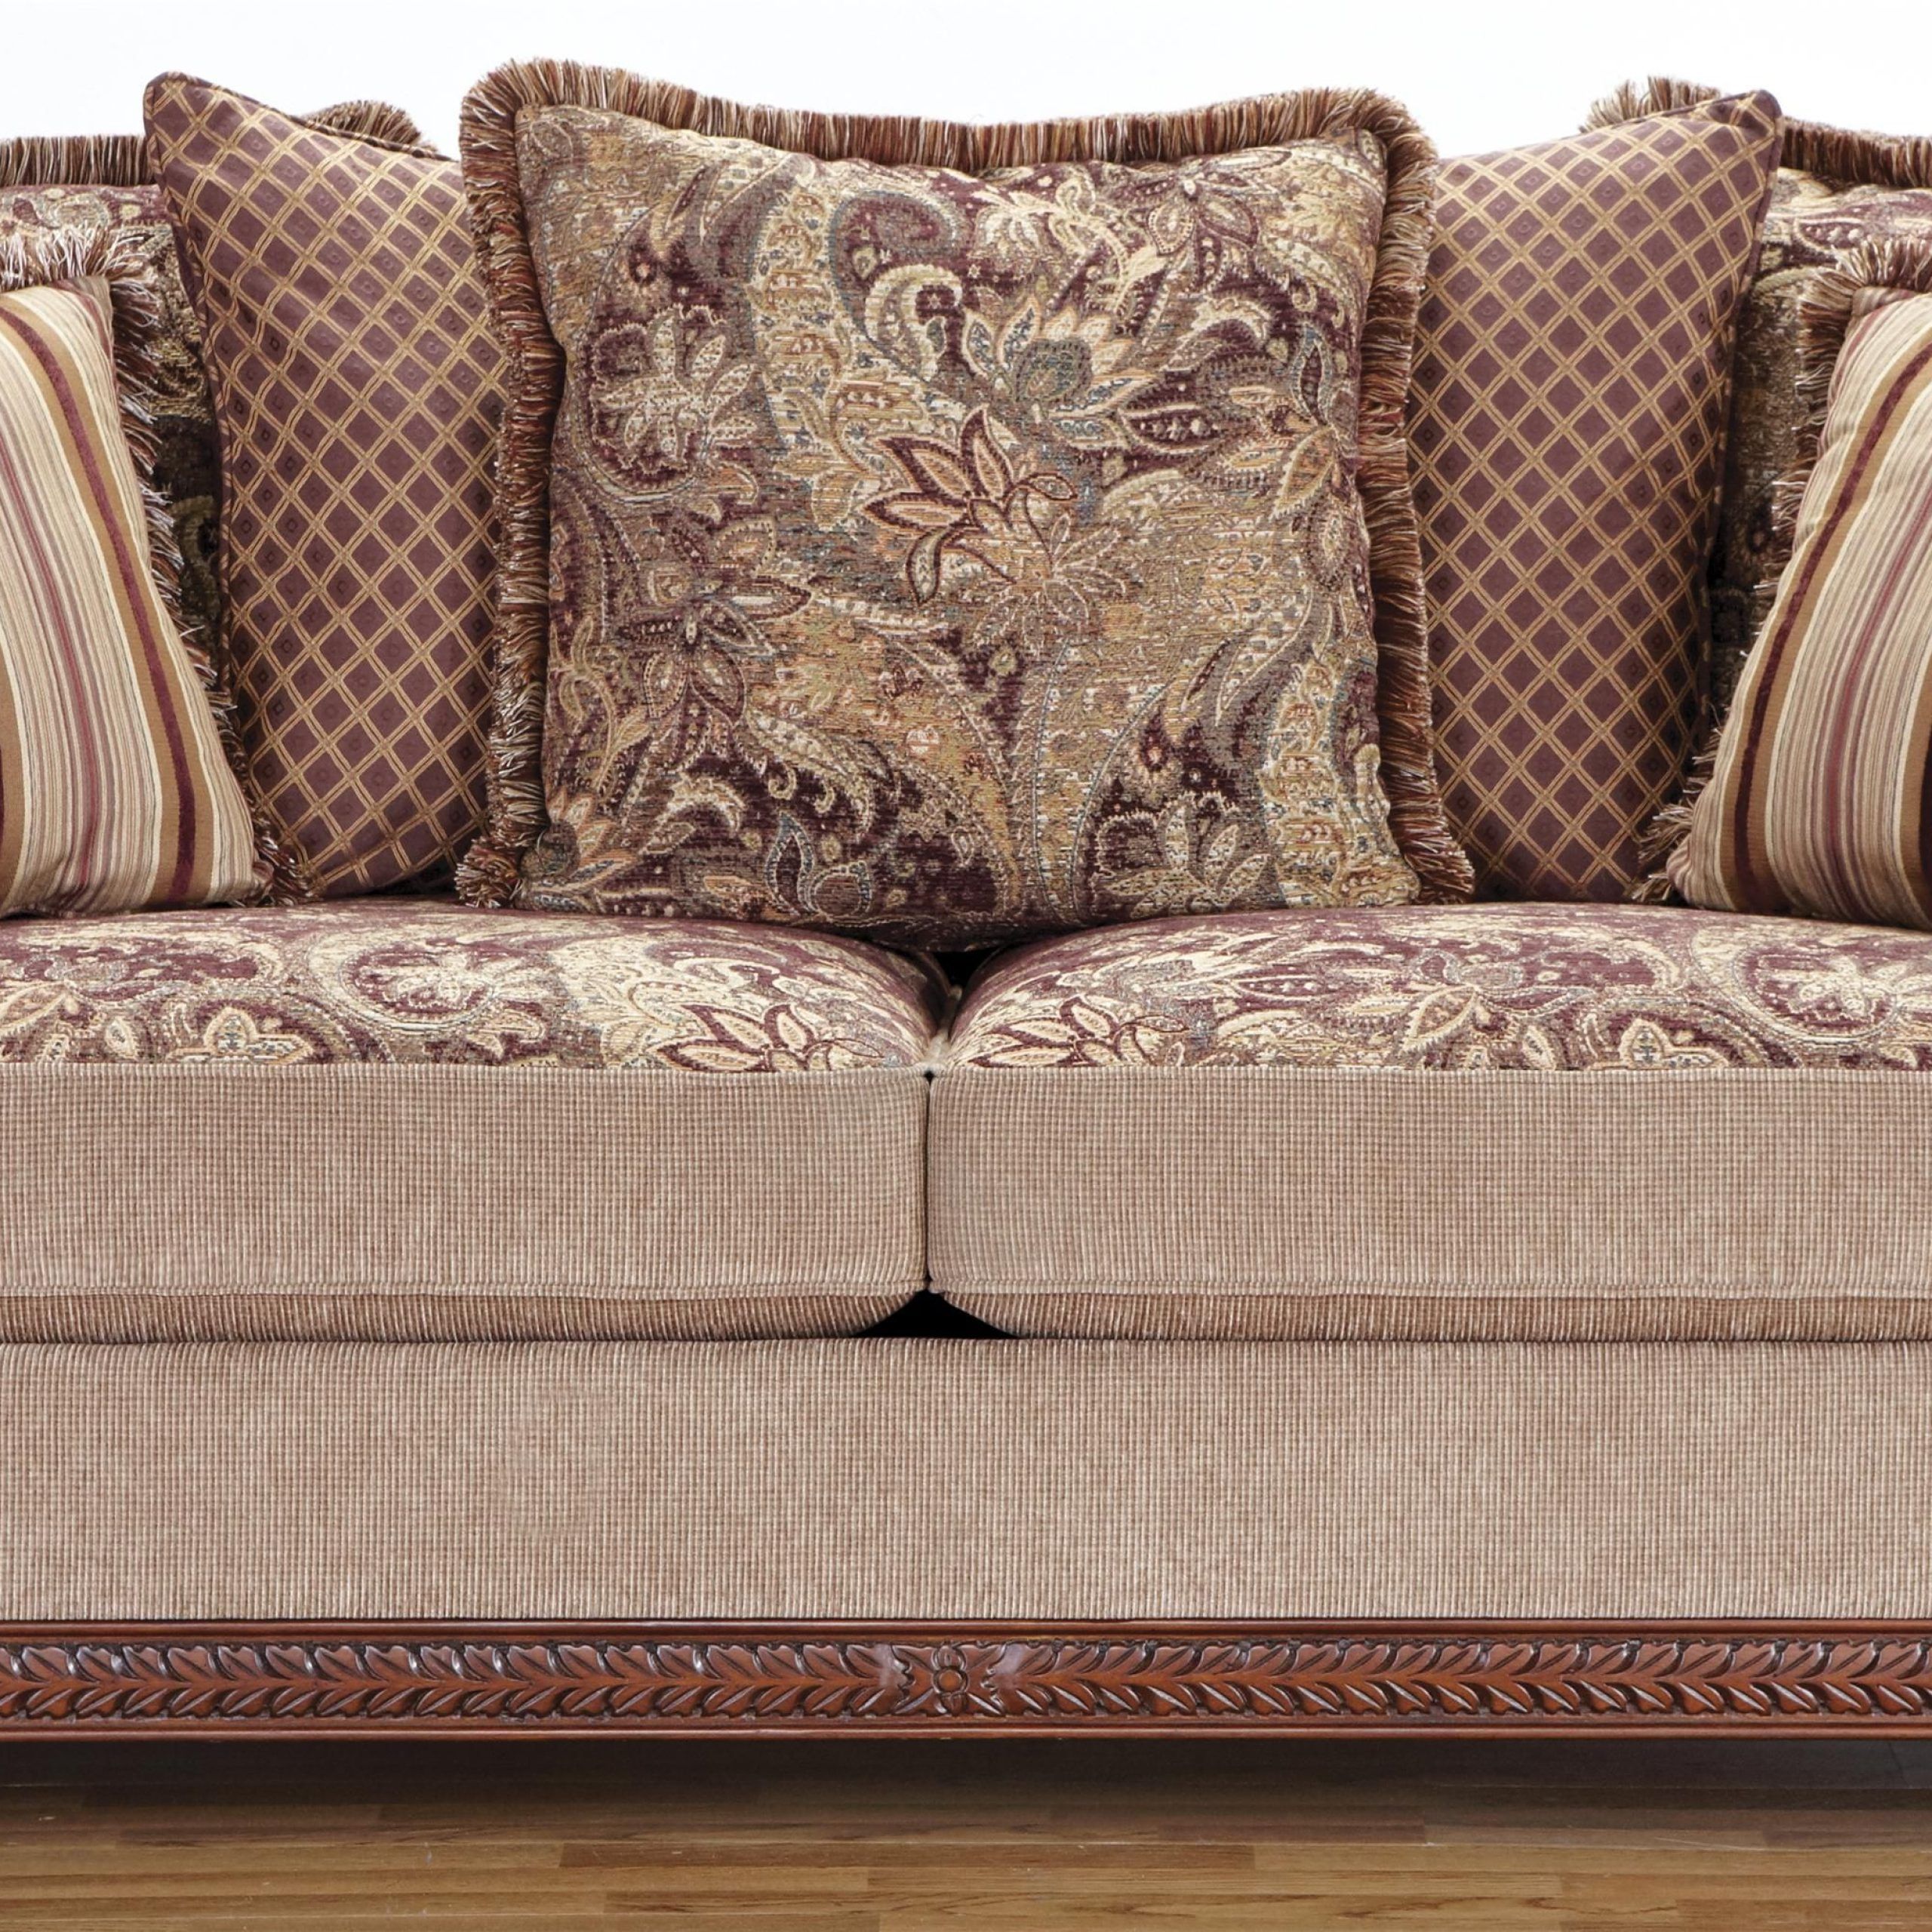 8716 Traditional Rolled Arm Sofa With Decorative Wood Trimhm Within Newest Sofas With Pillowback Wood Bases (View 6 of 15)